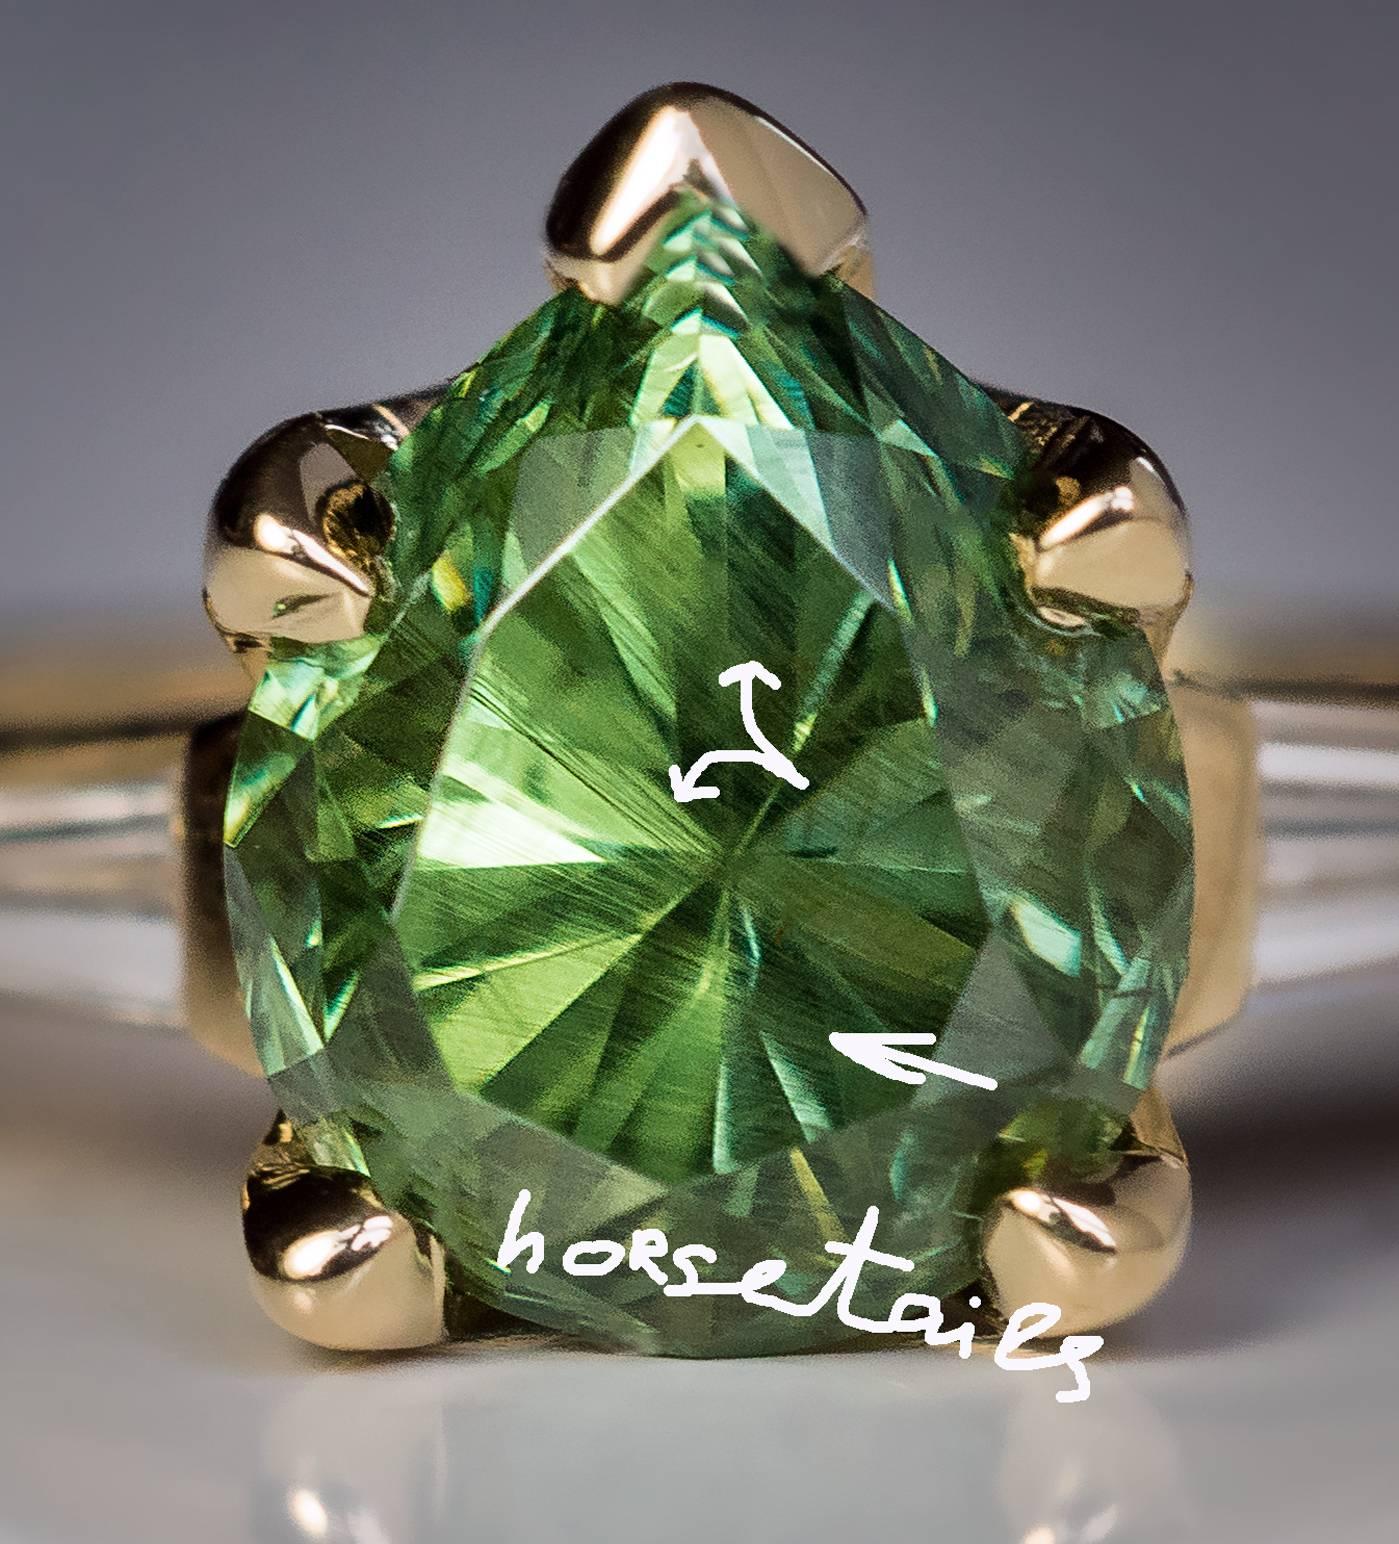 A contemporary 18K gold ring features a big and sparkling 2.85 ct pear cut Russian demantoid garnet flanked by two tapered baguette cut diamonds ( 0.44 ct total weight, E-F color, VS1 clarity).
Russian demantoids over 2 carats are very rare. The